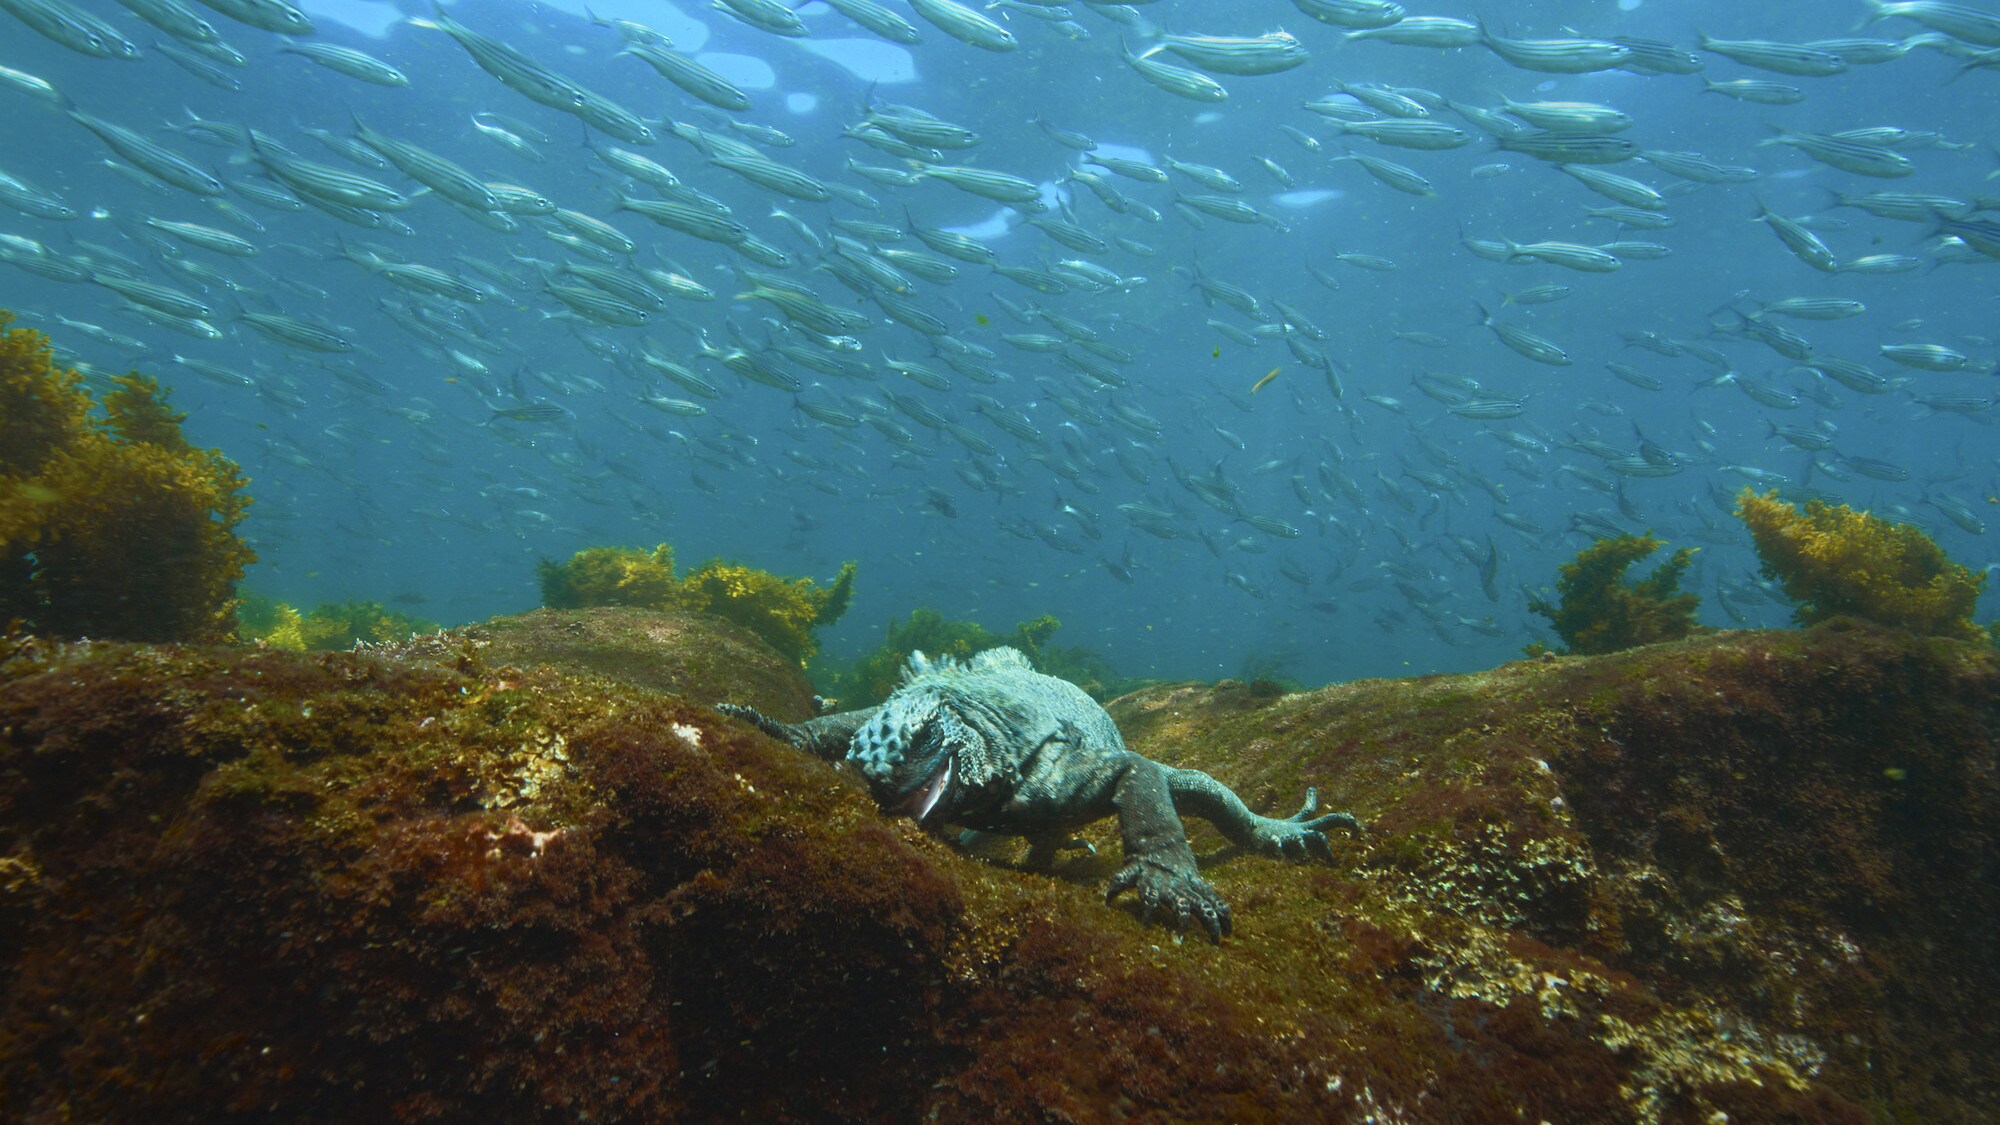 A Marine iguana on a rock underwater. (National Geographic for Disney+/Bertie Gregory)